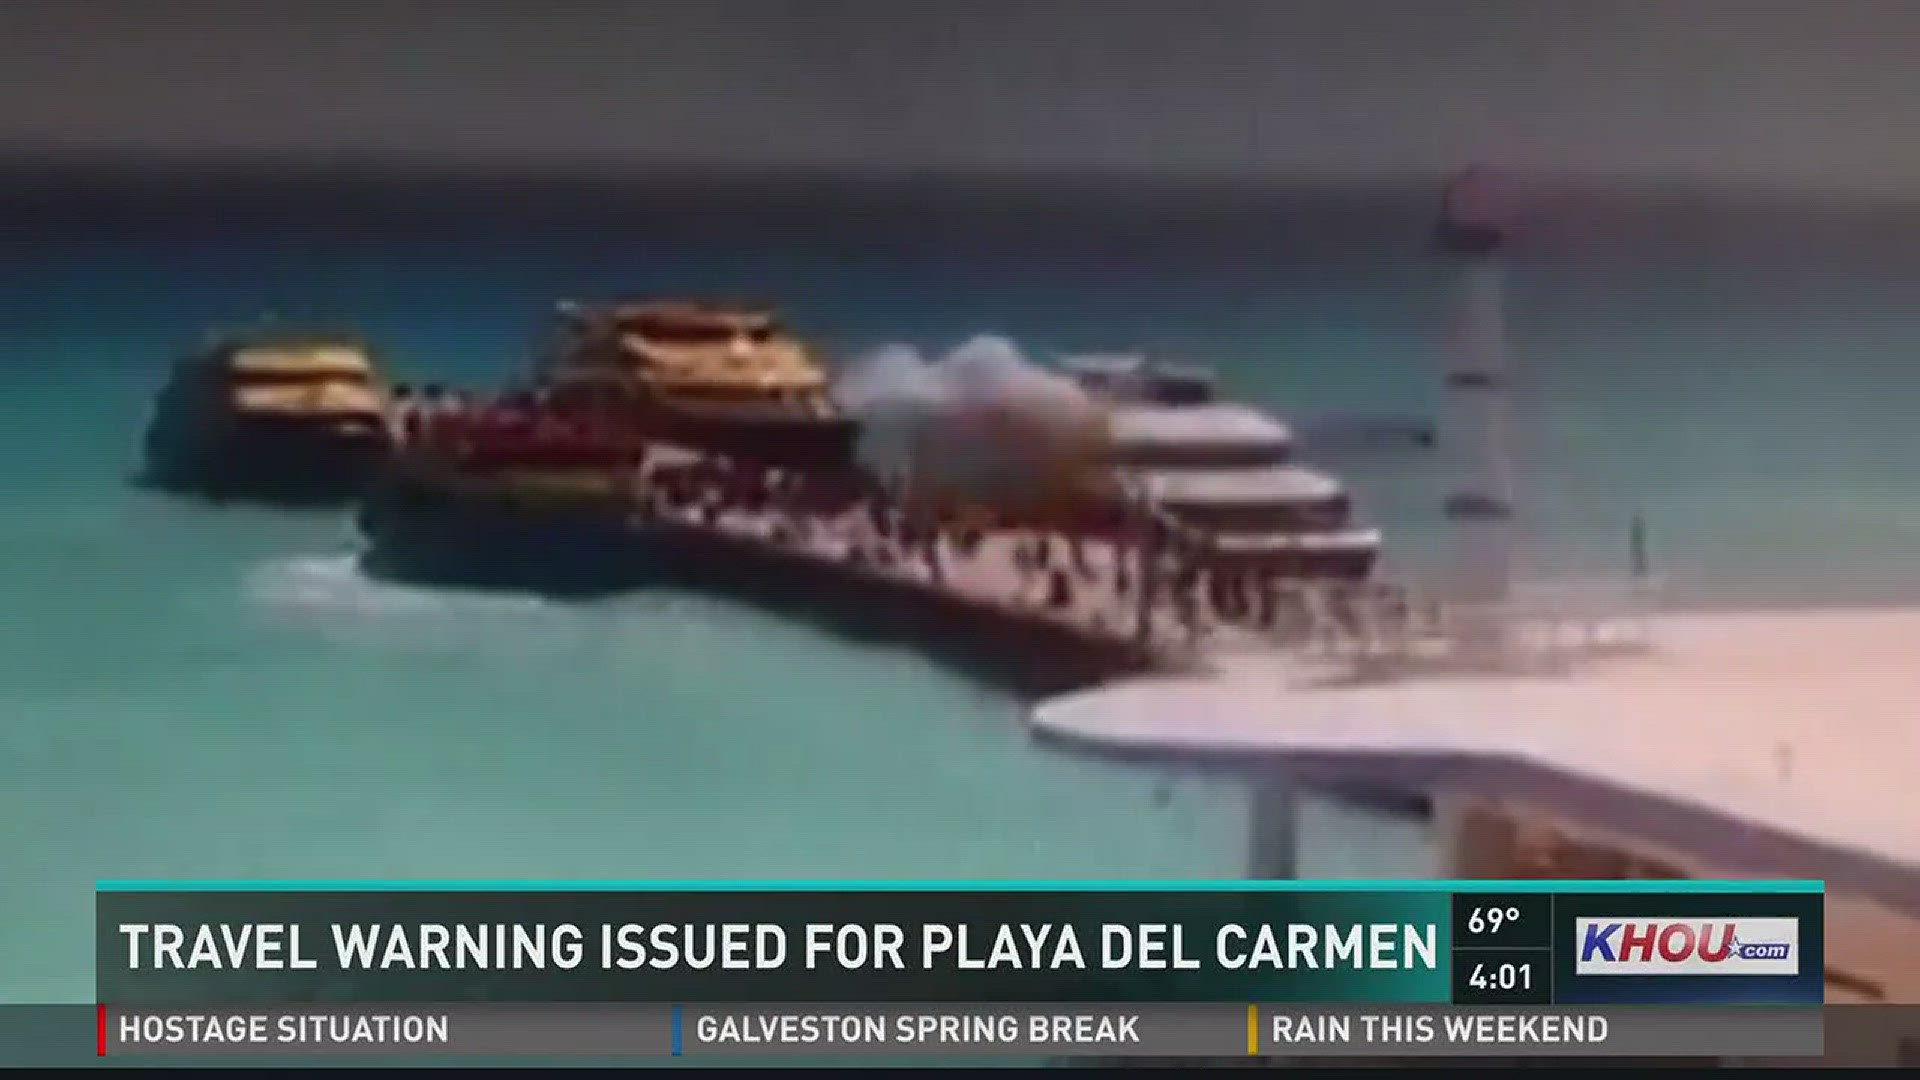 The U.S. state department issued a travel warning about one of Mexico's most beautiful beach resorts.